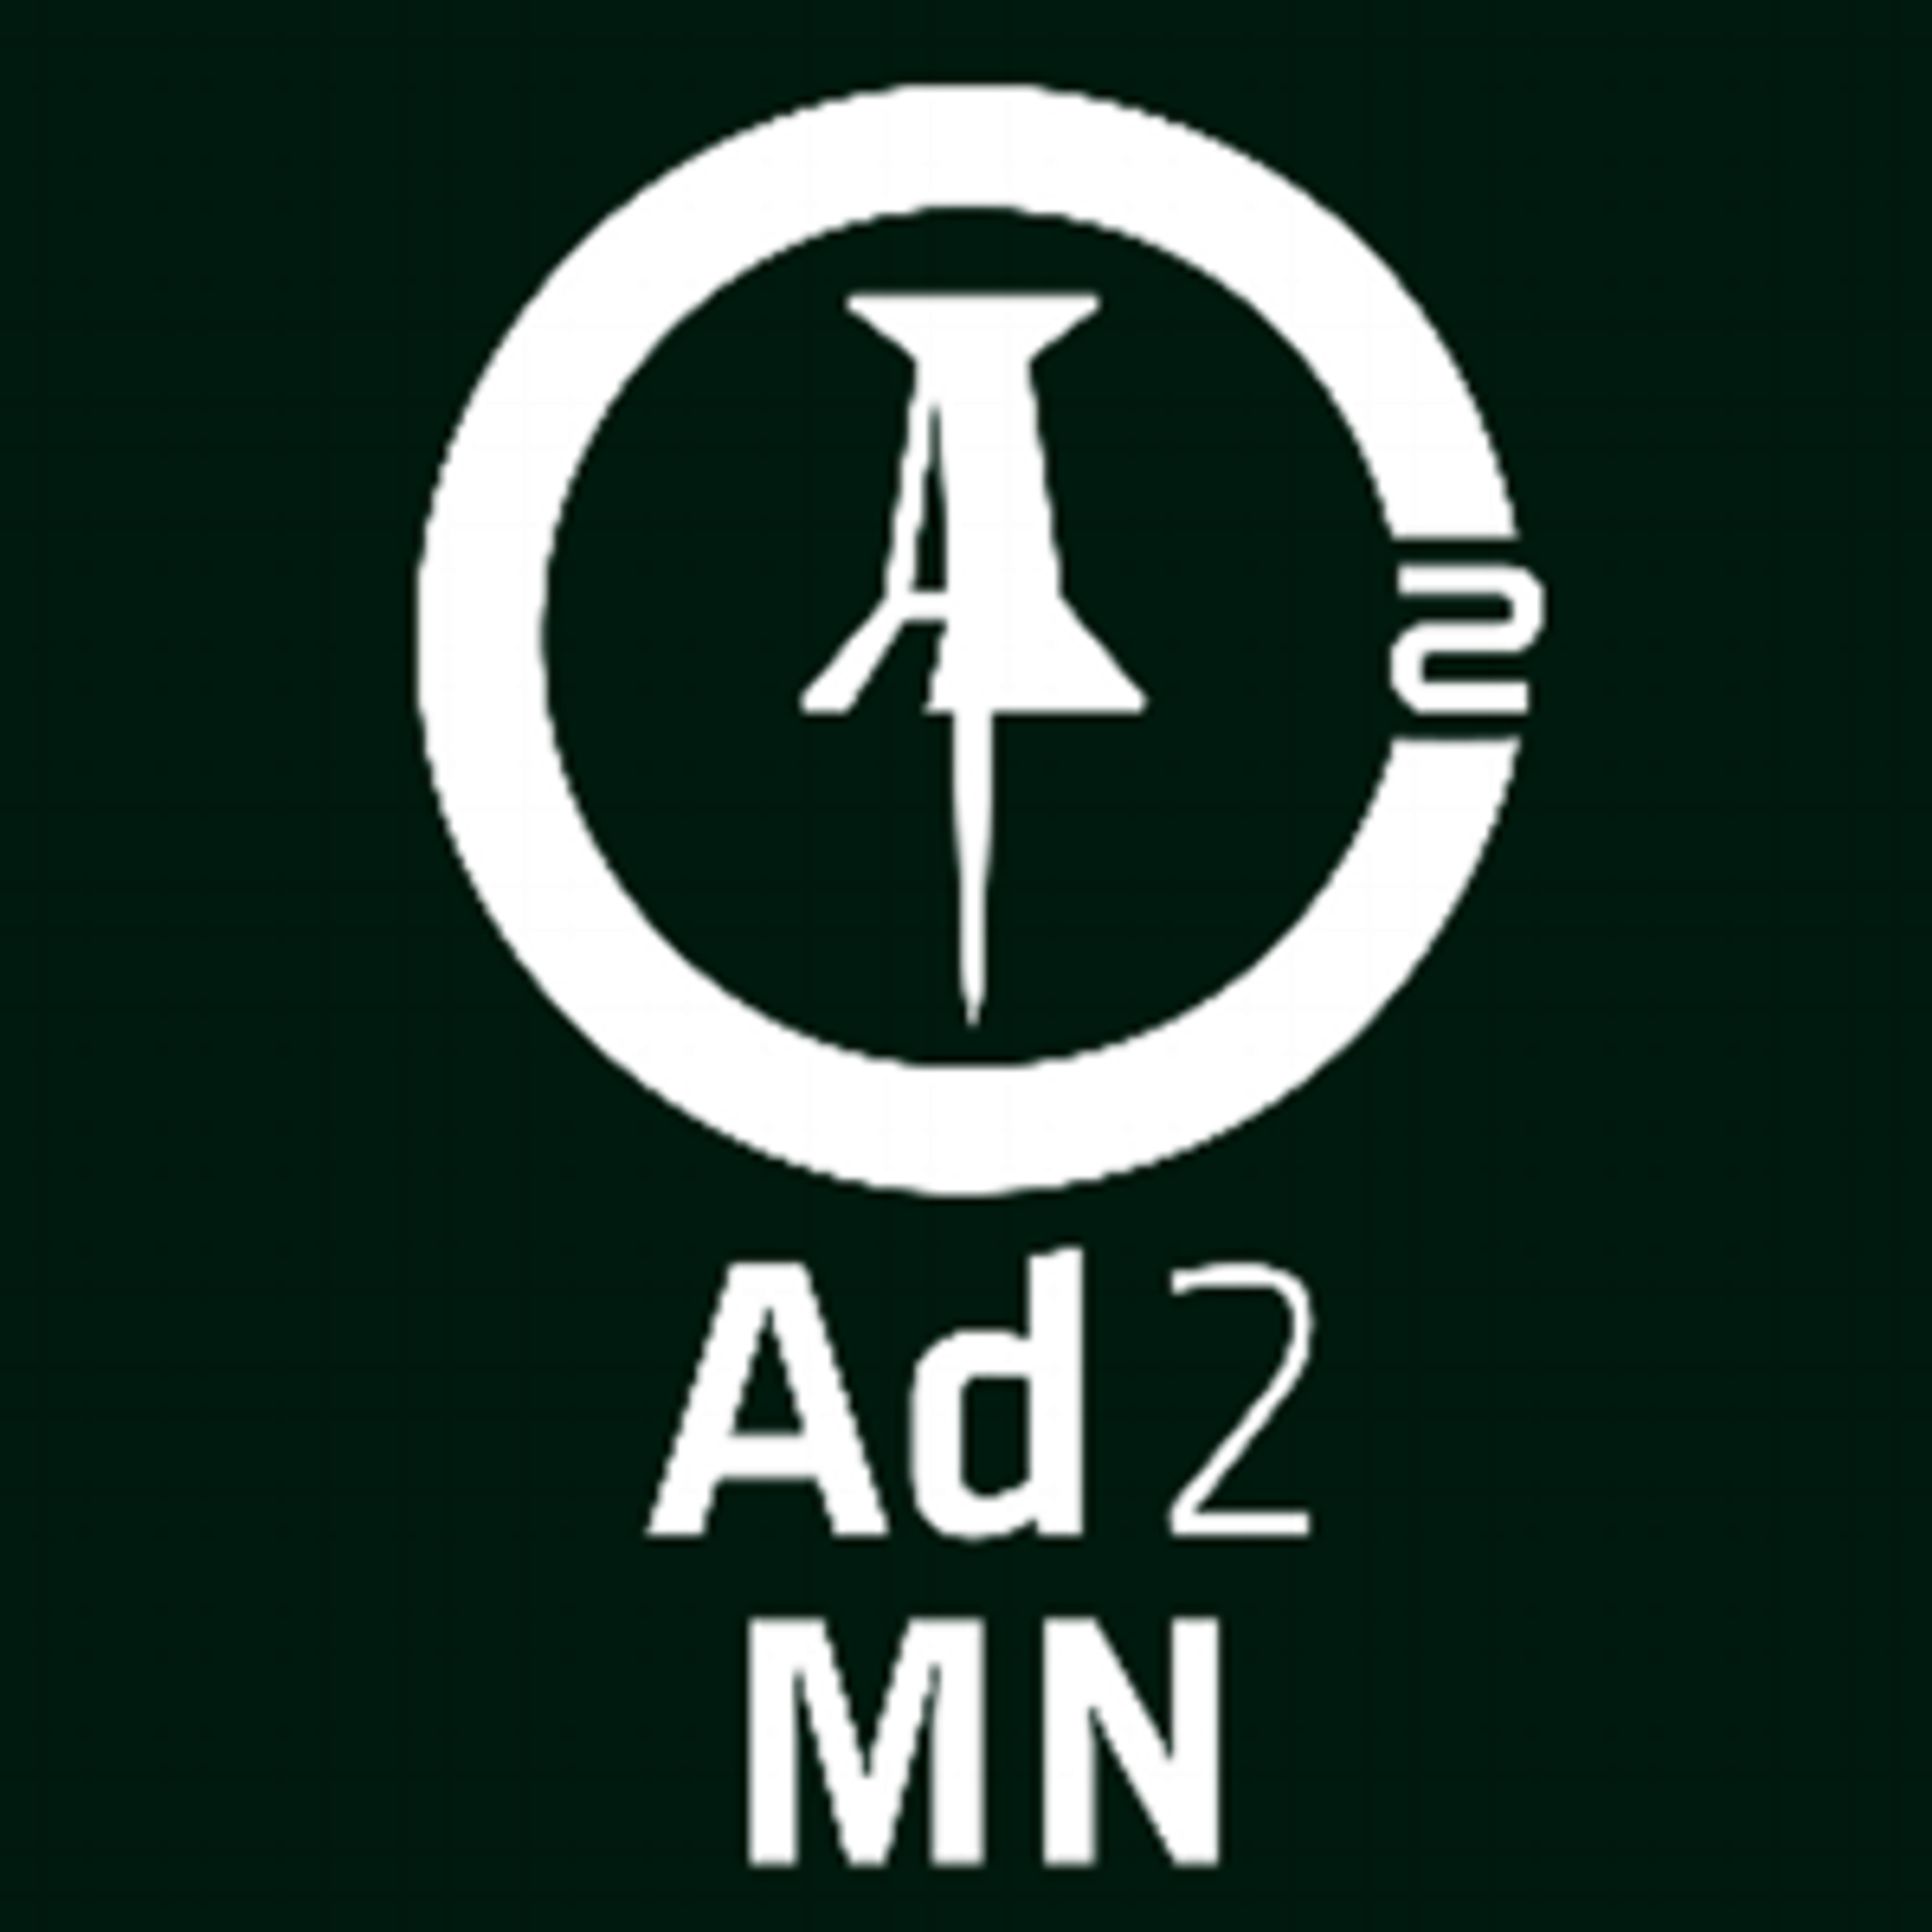 ADFED & AD2 (32 and under) 